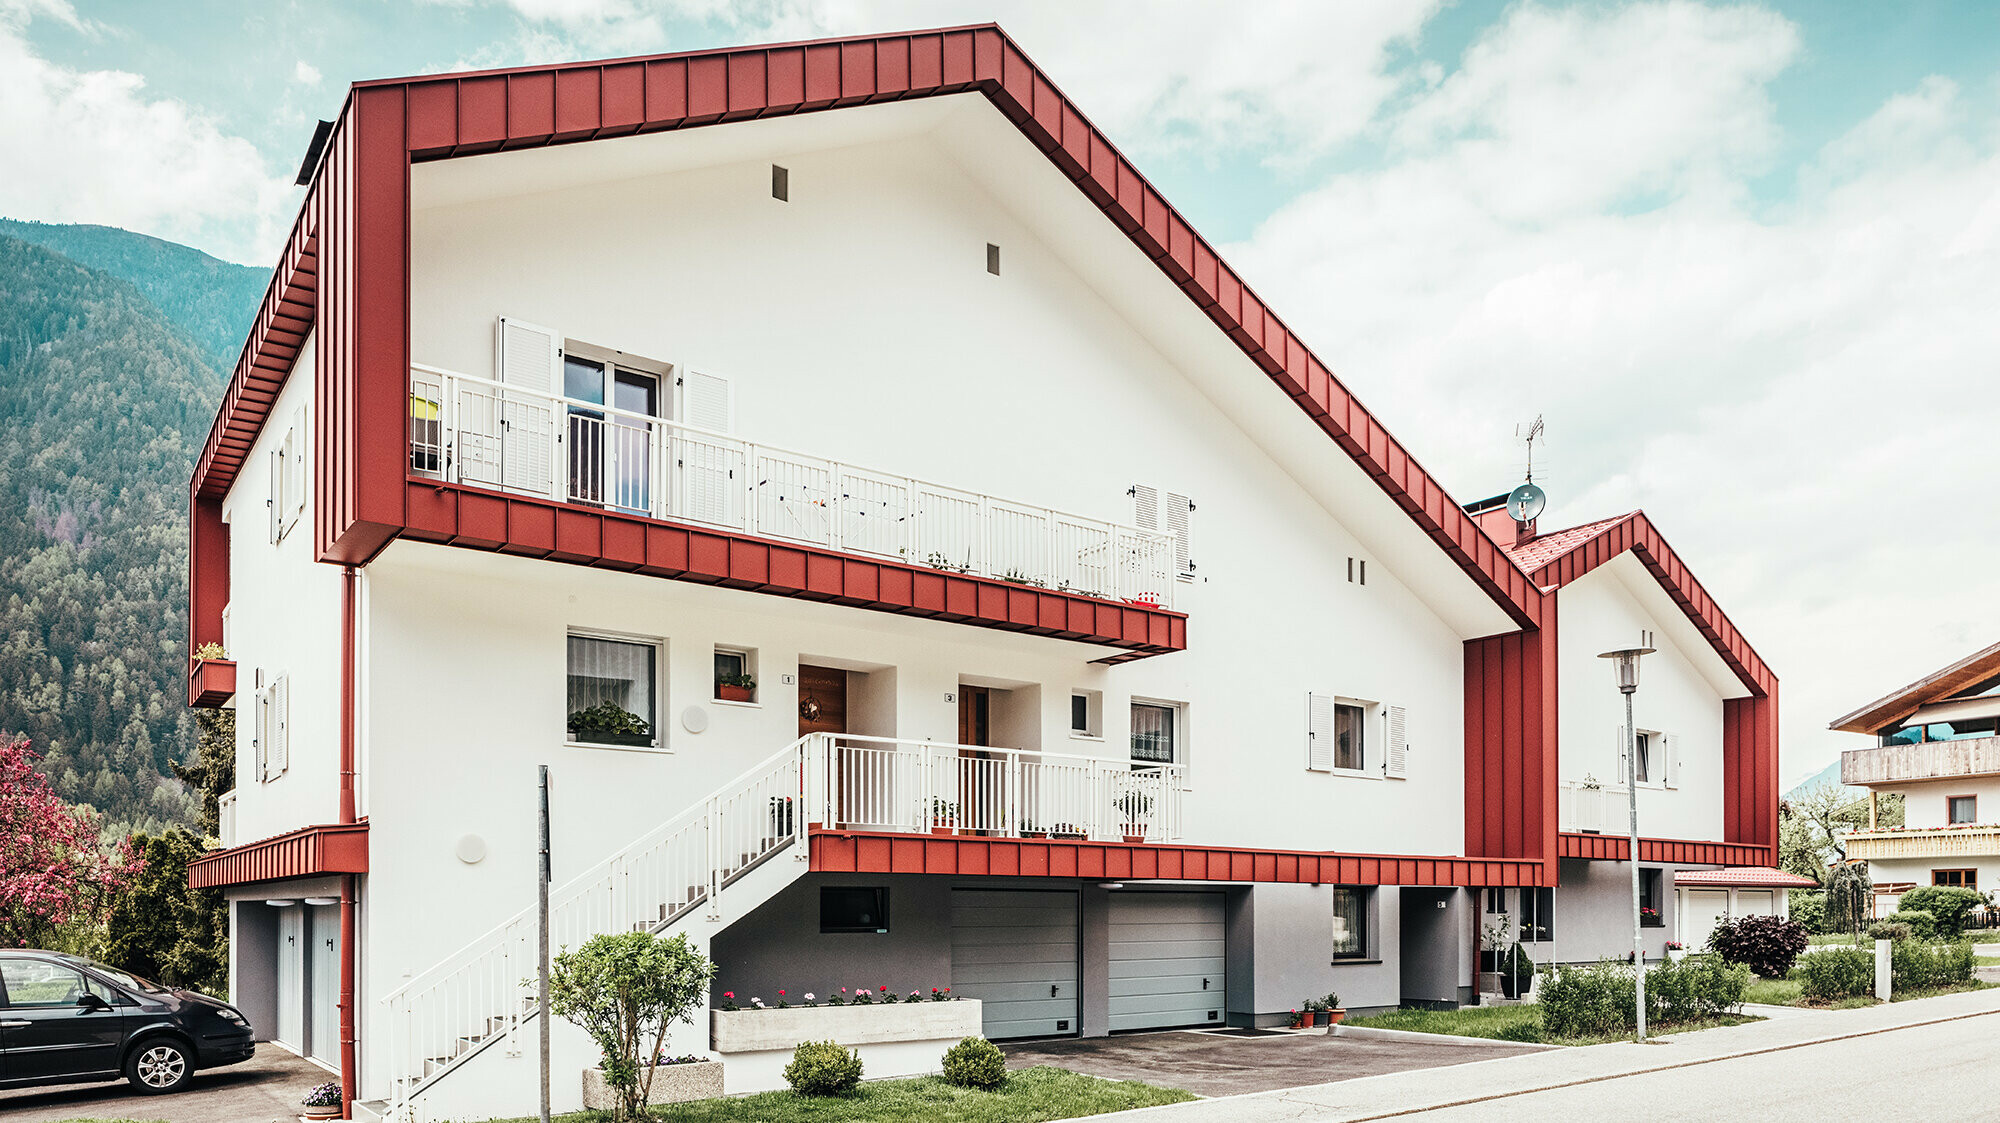 After photo of the residential building in Gais: the oxide red roof panel frames the two adjoining residential buildings.